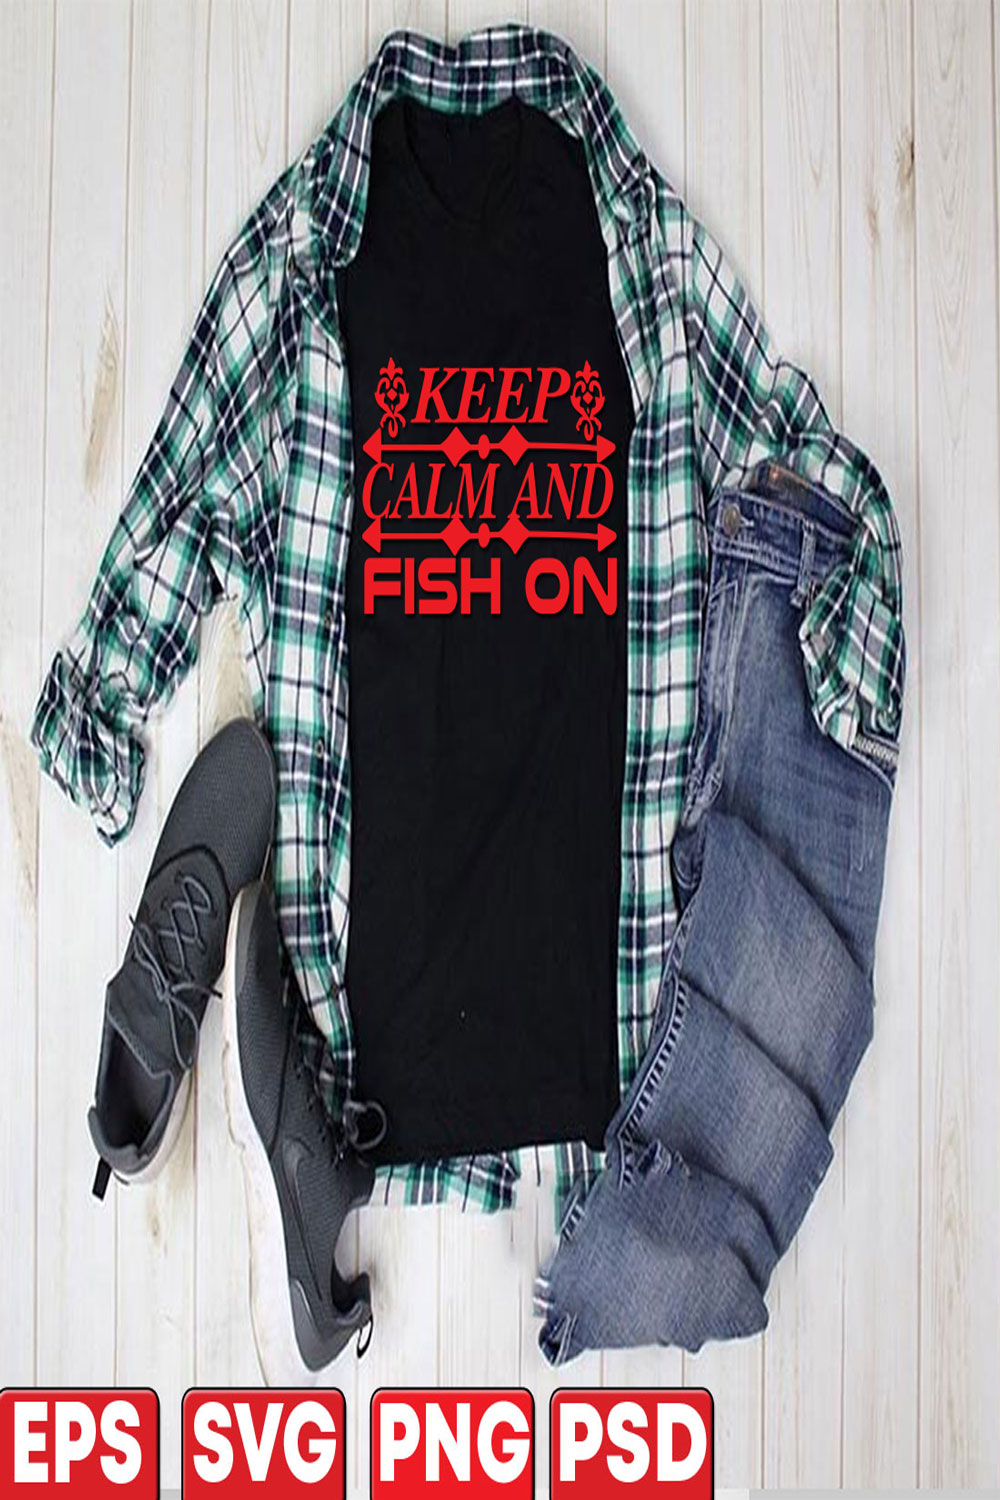 Keep-calm-and-fish-on pinterest preview image.